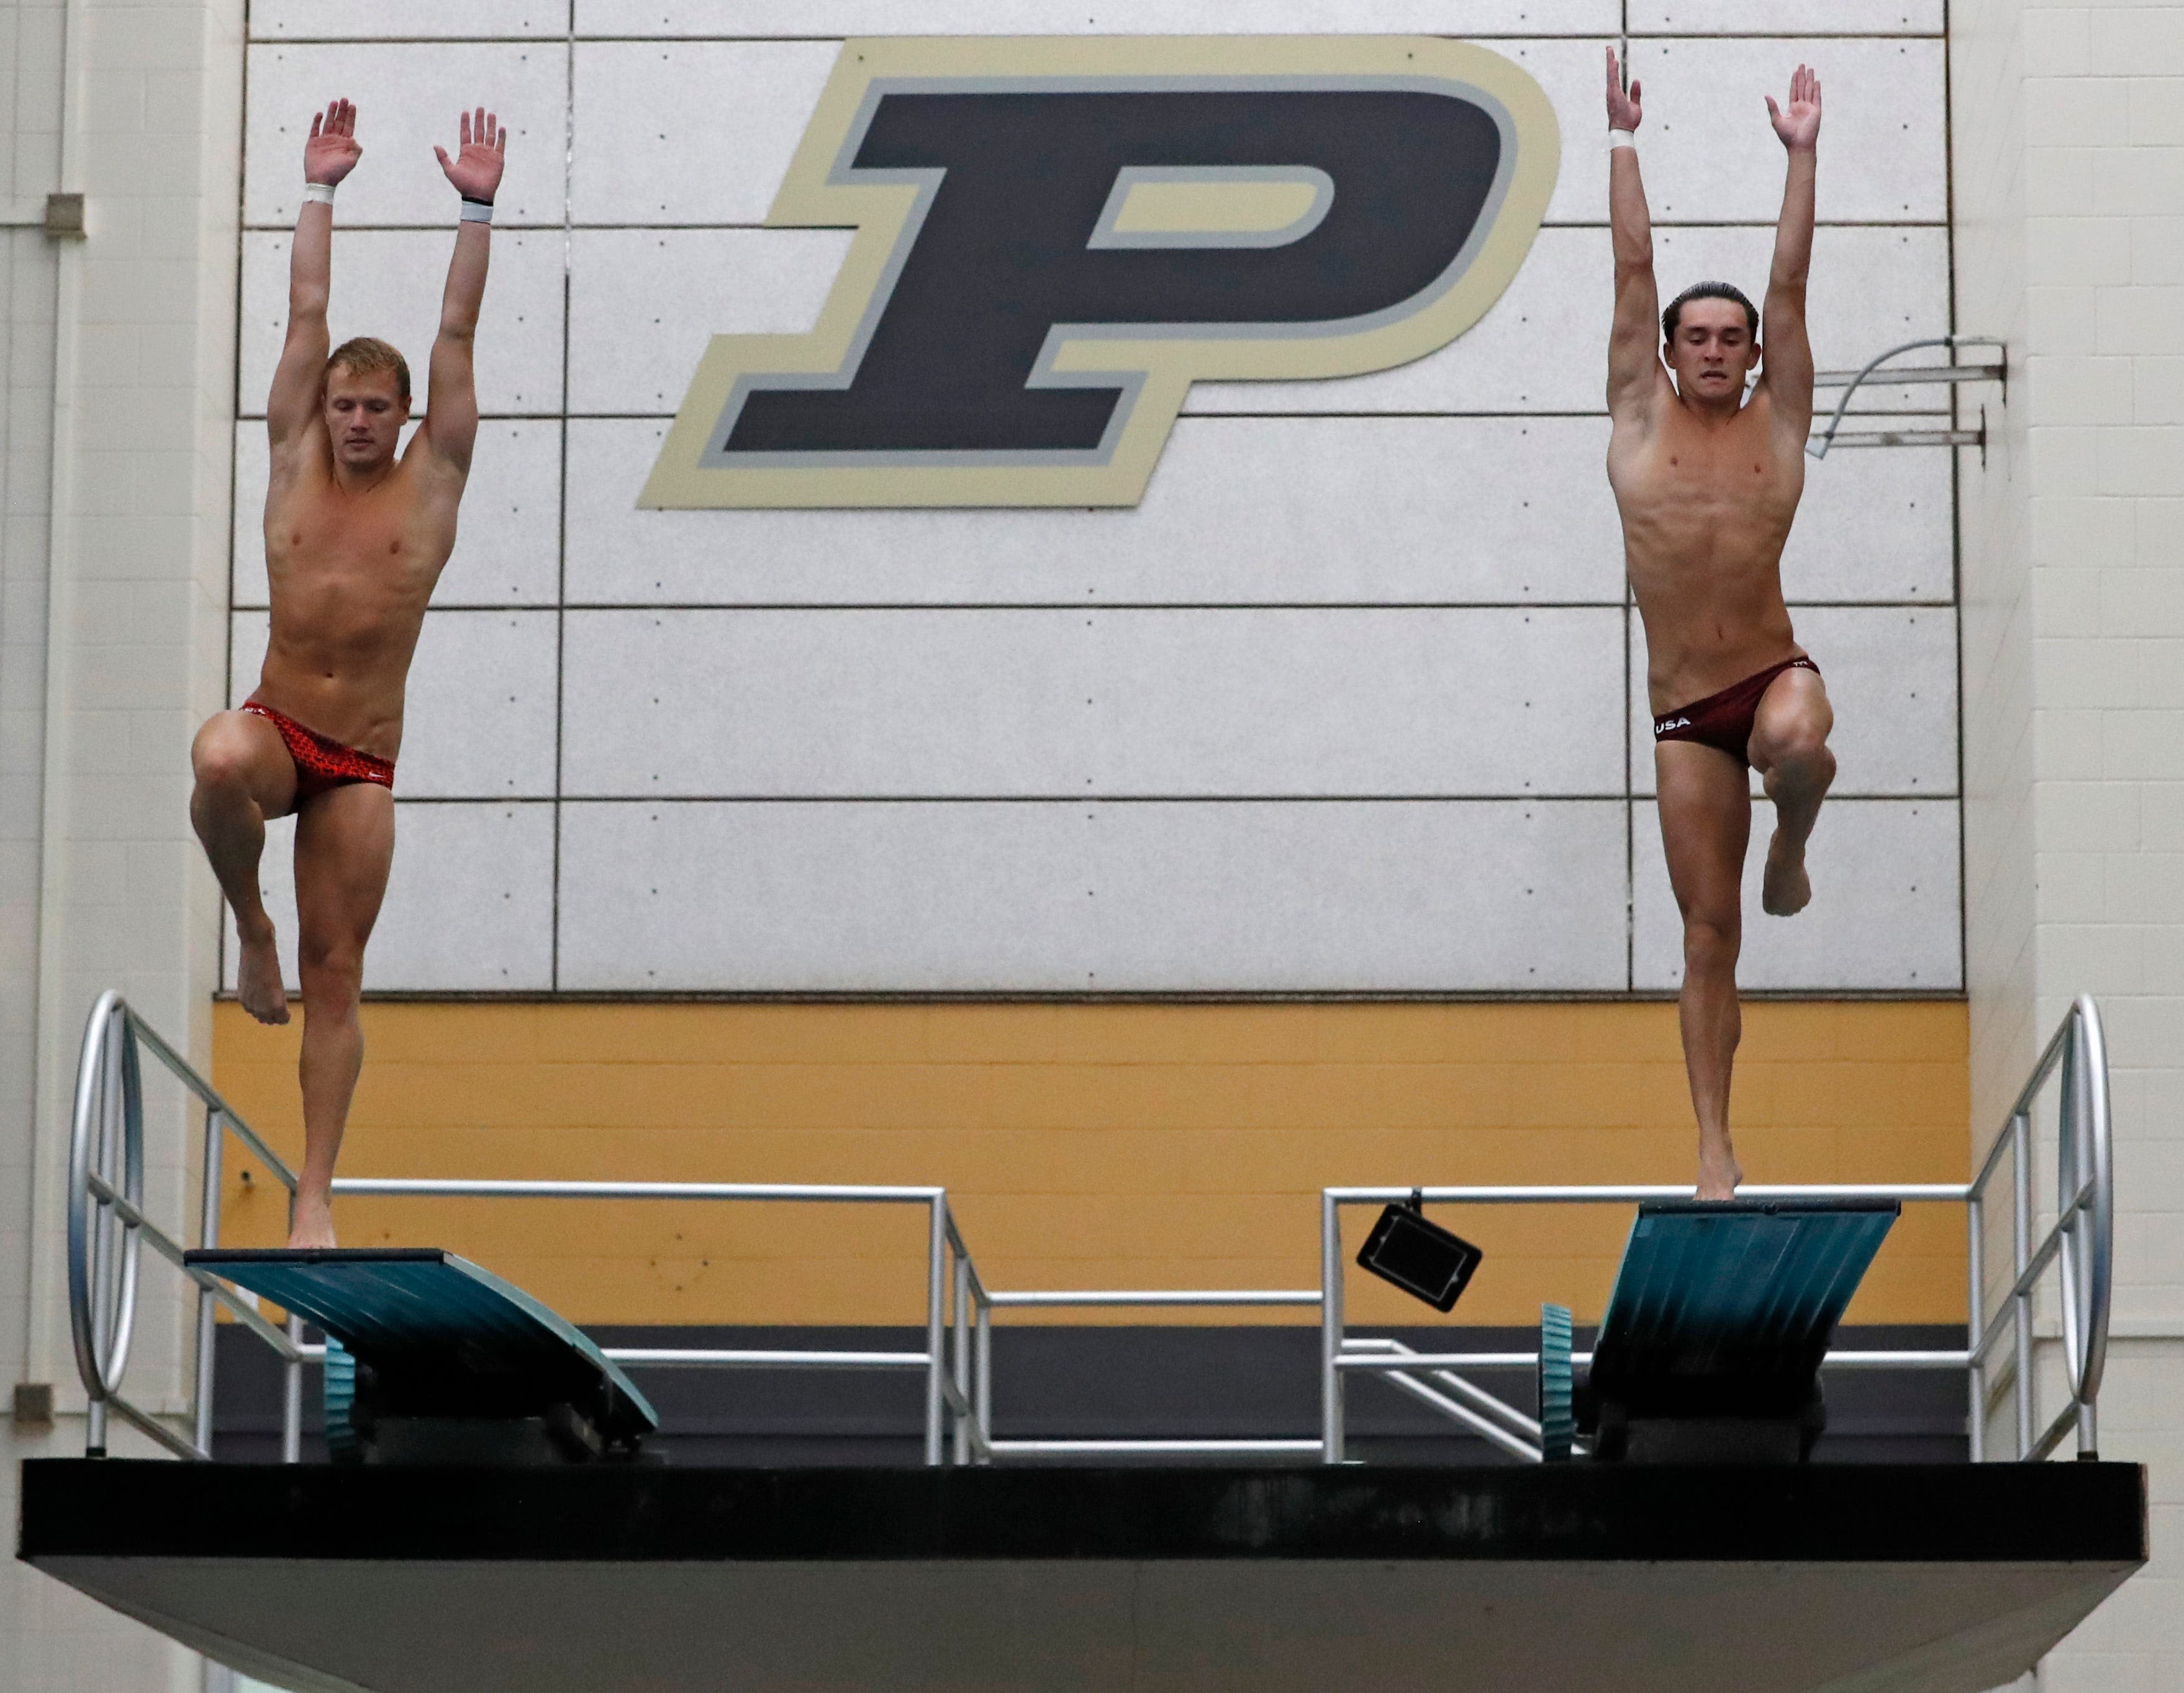 'About the journey' for former Purdue divers Greg Duncan, Tyler Downs at Olympic Games